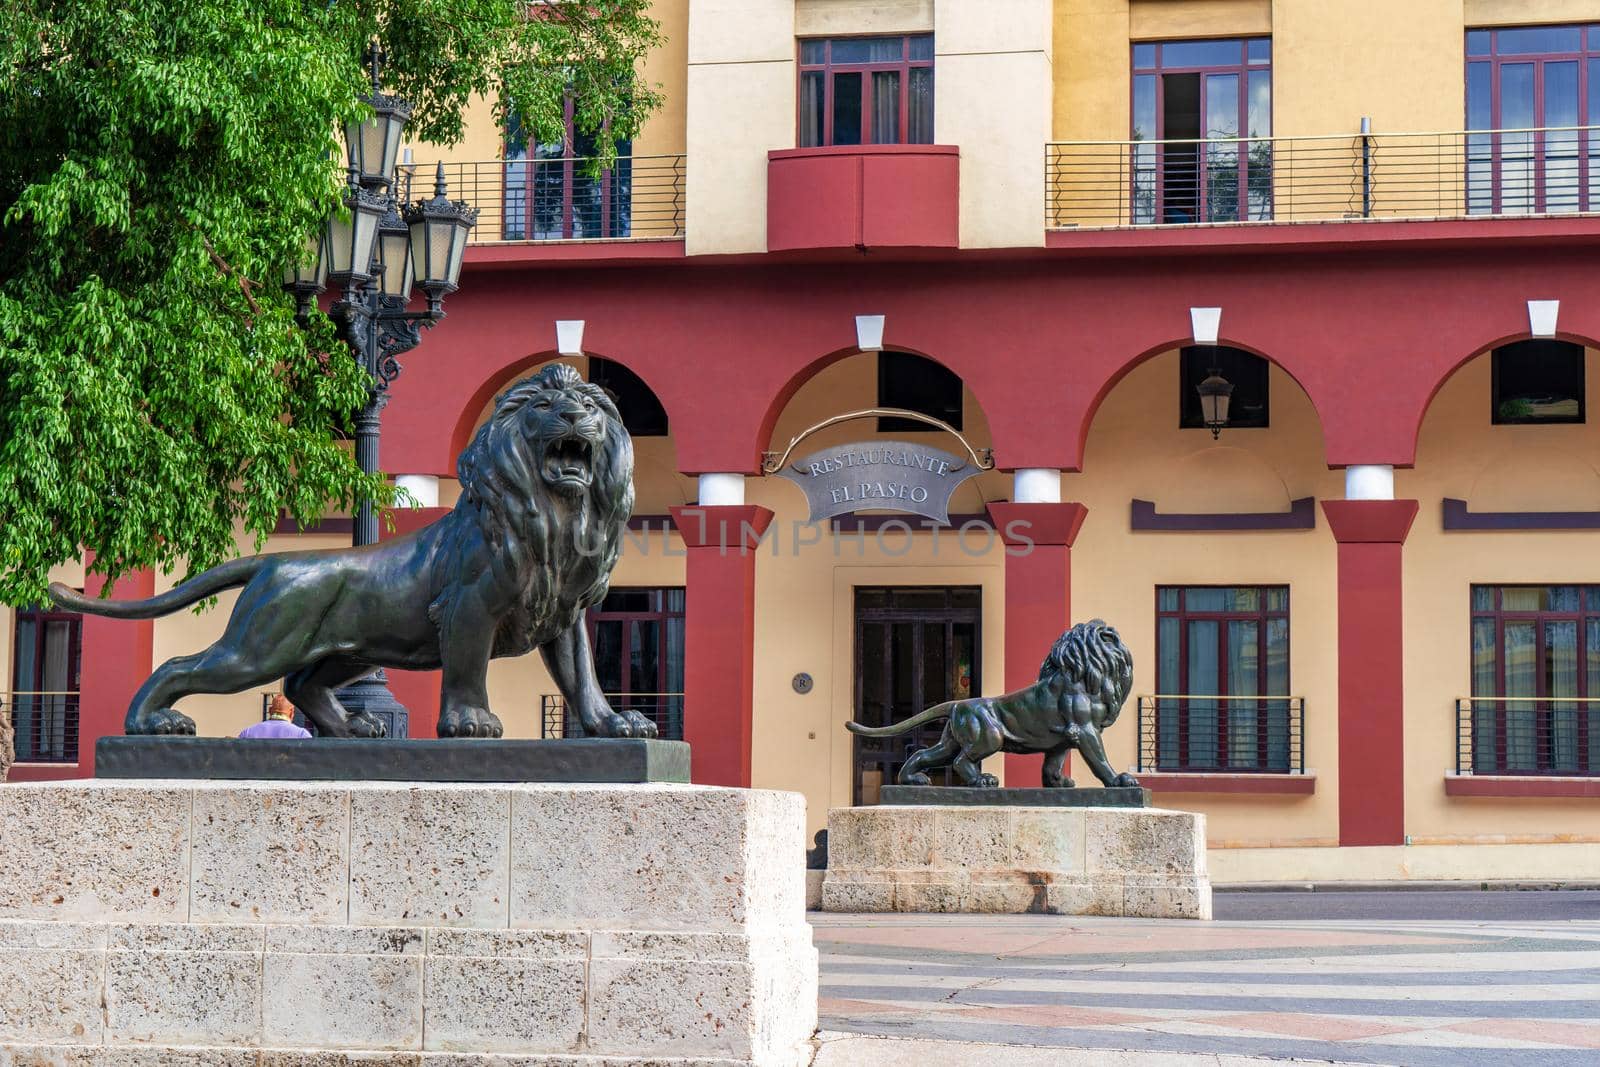 Exterior view of the El Paseo Restaurant and the sculptures of the lions of the Paseo del Prado, a place frequented by tourists